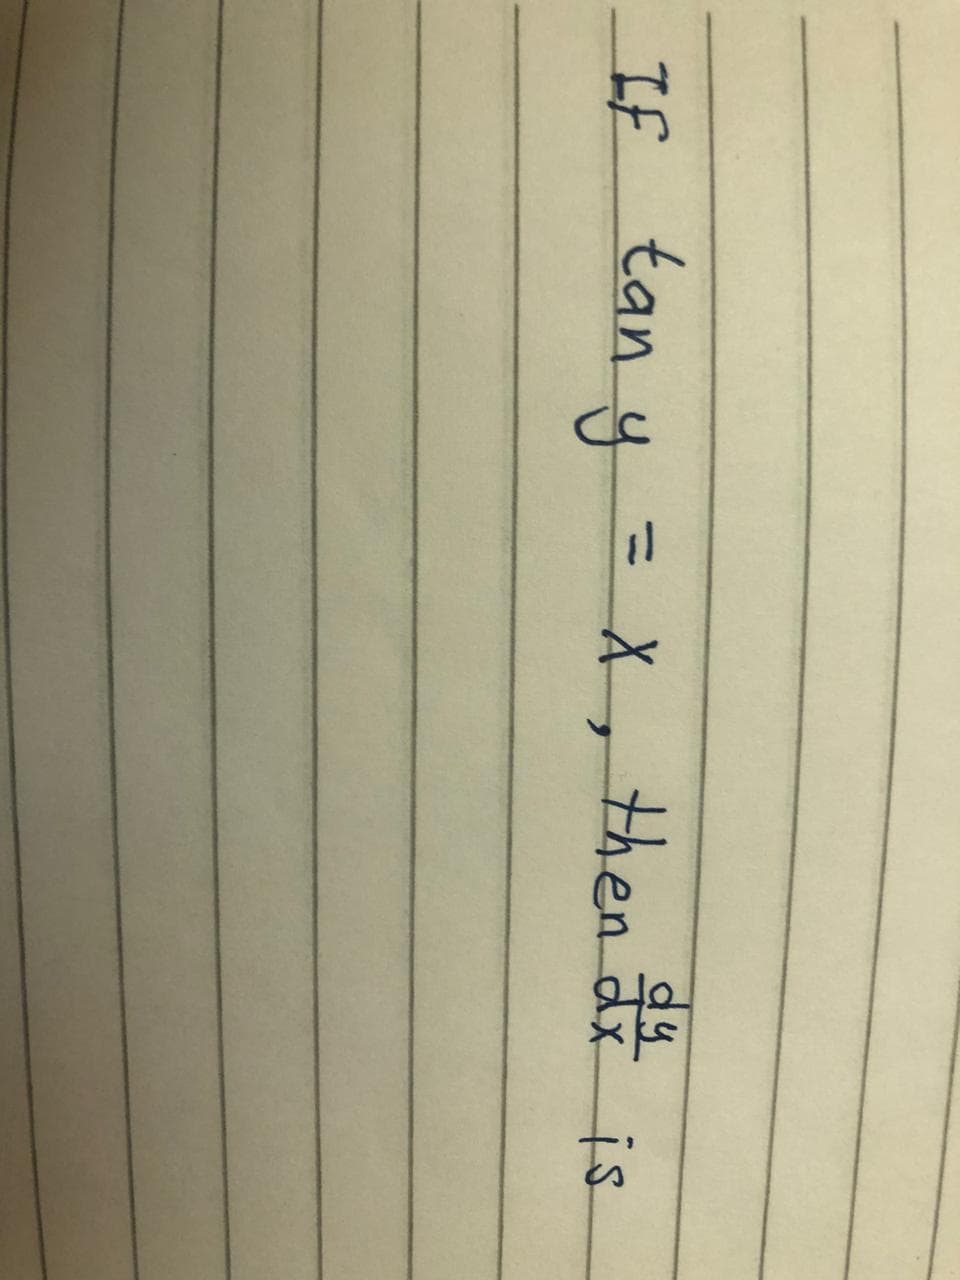 If tan y
y=
X, then di is.
%3D
